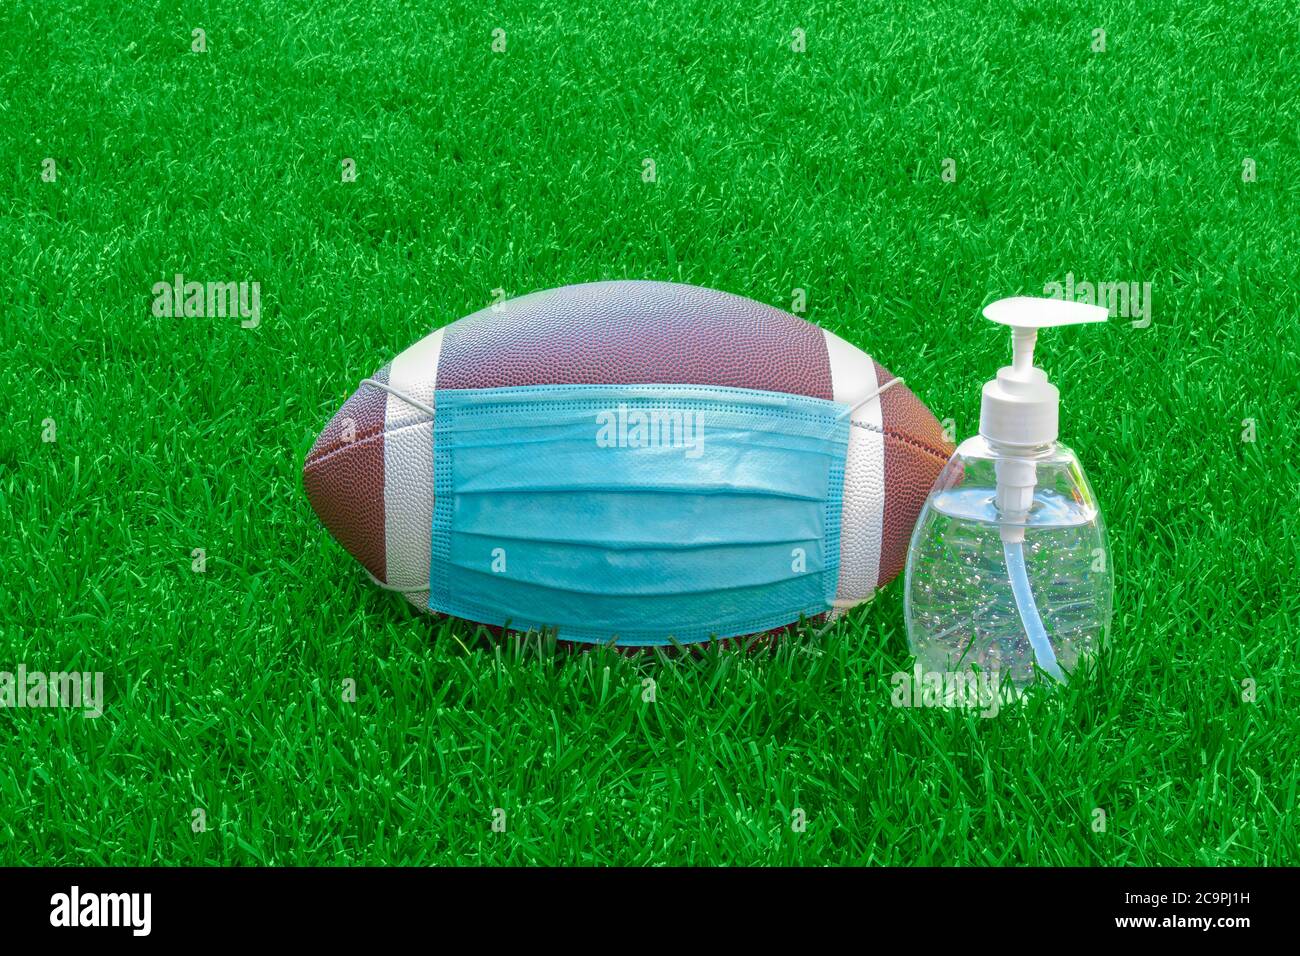 An American Football with a face mask and hand sanitizer on the right on field with green grass. Concept Football during pandemic Stock Photo